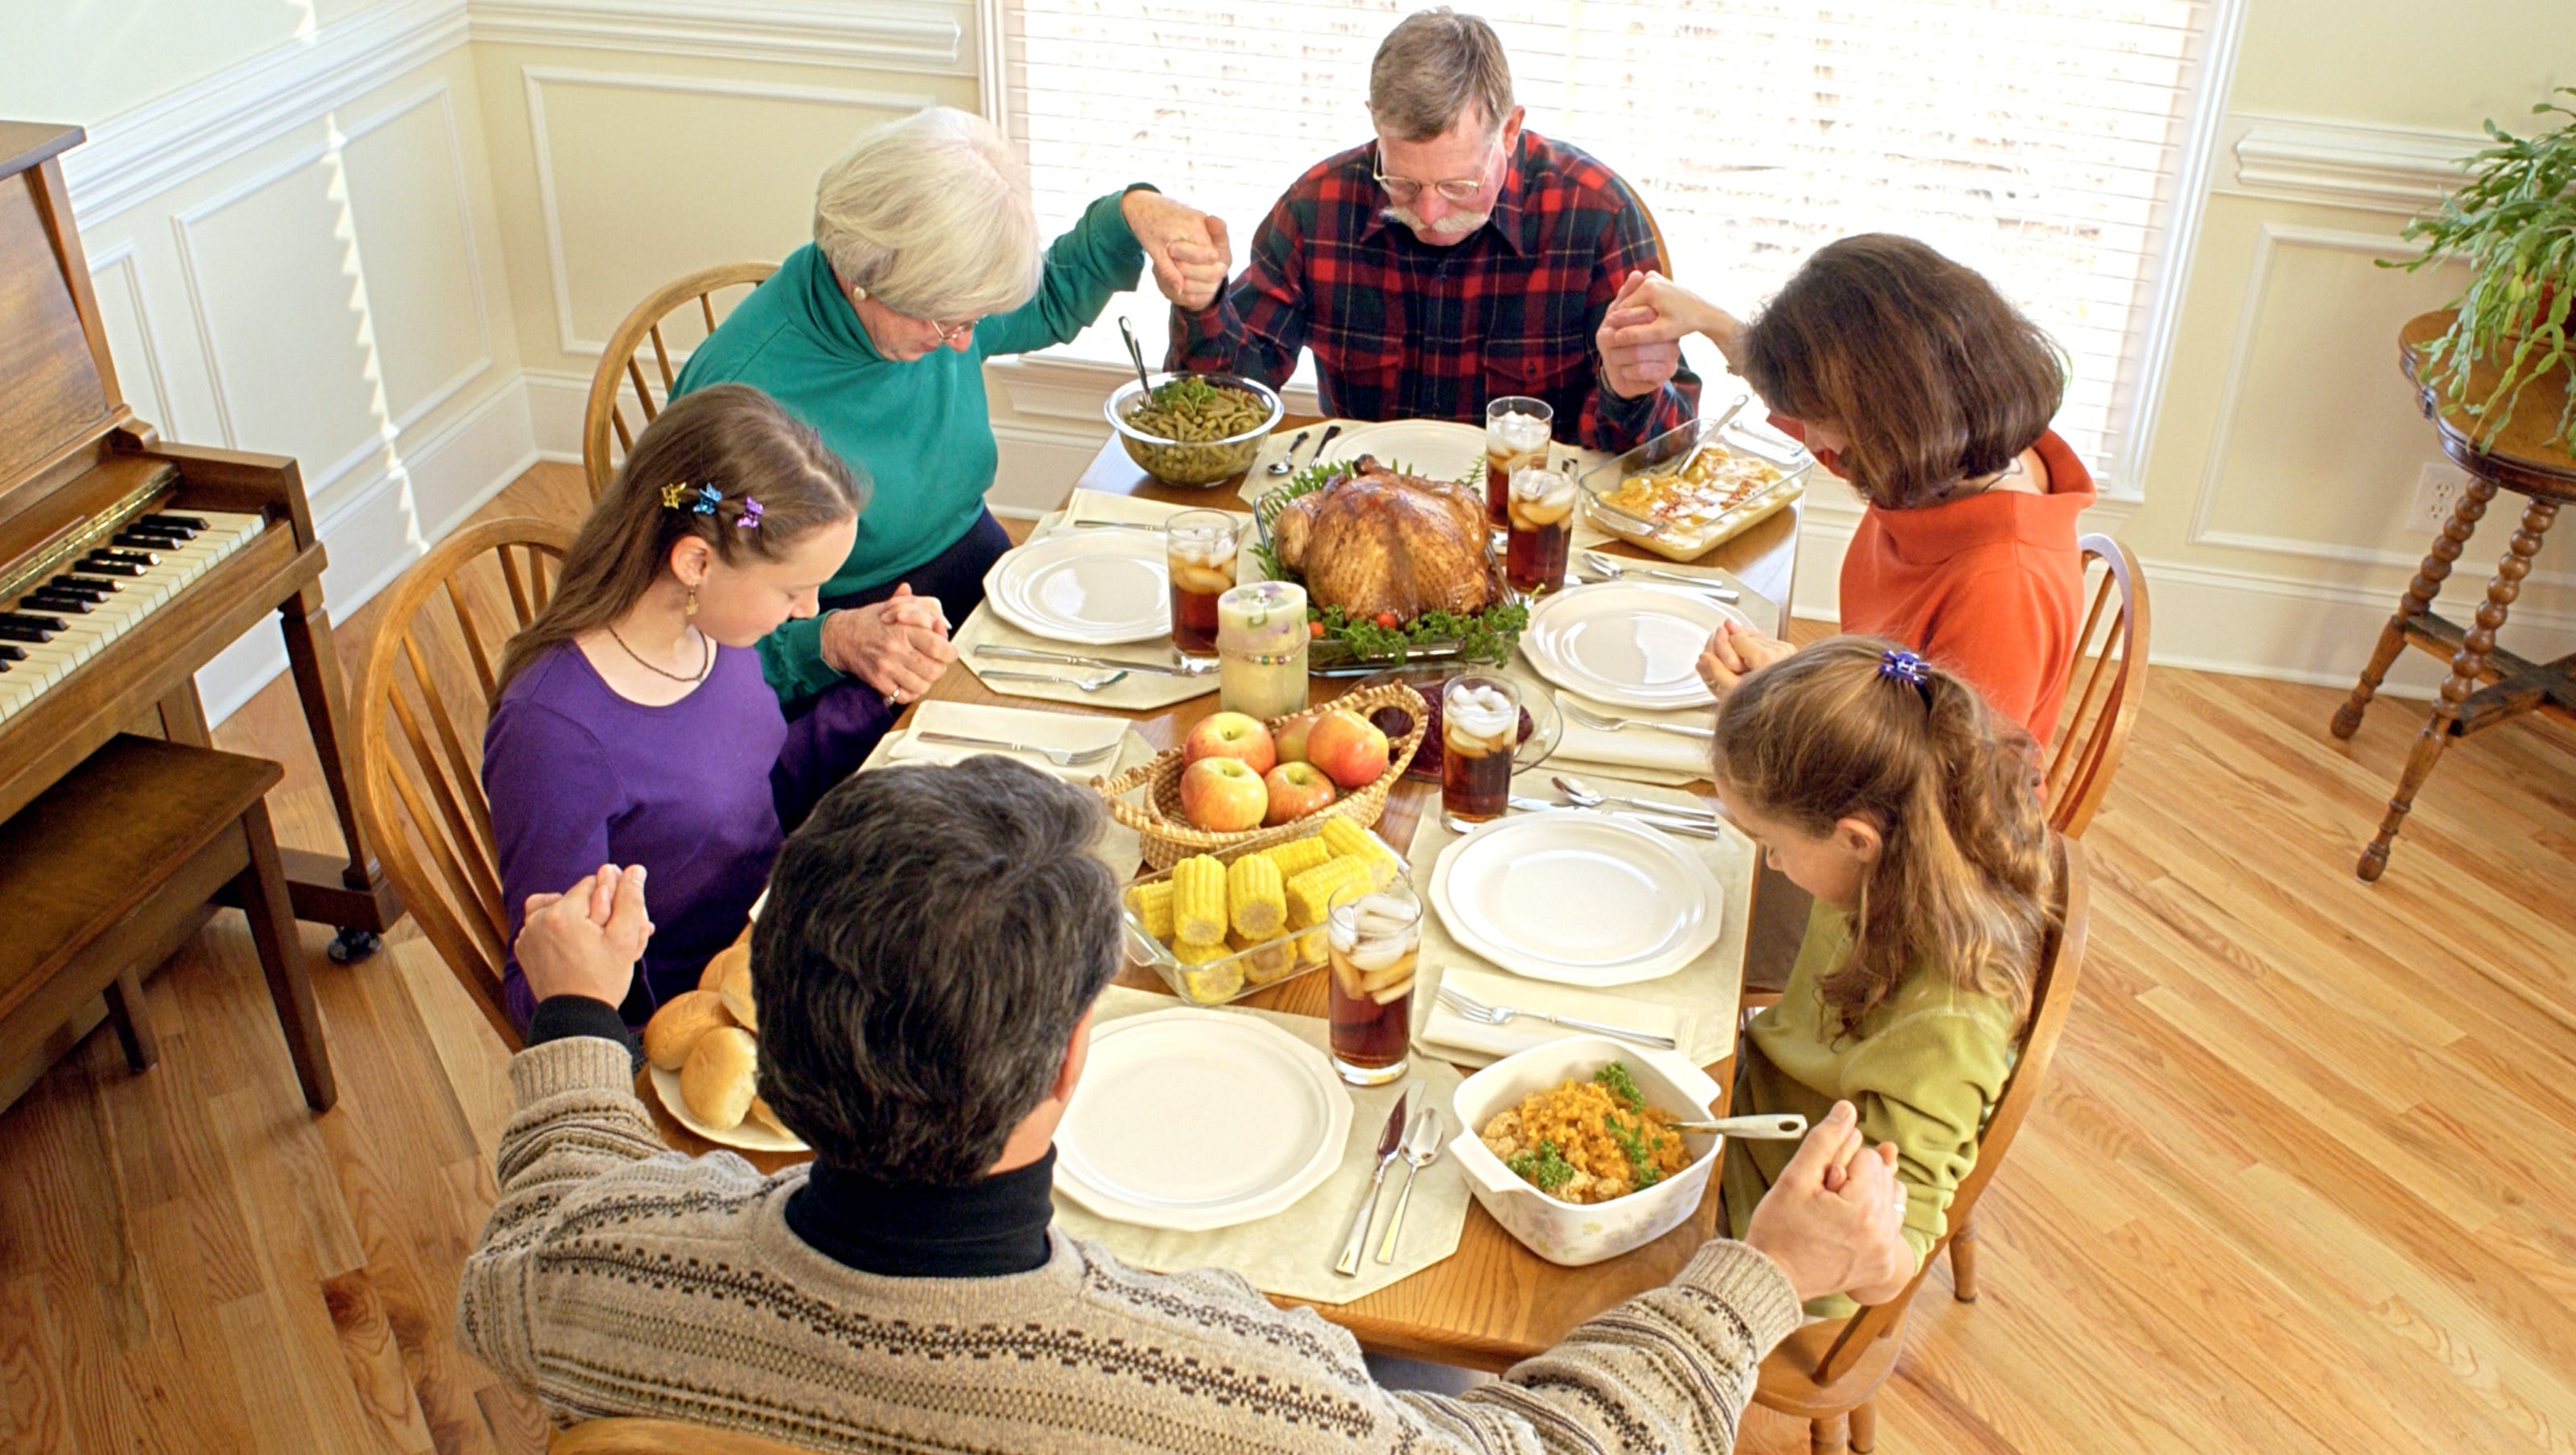 Each family dinner adds up to benefits for adolescents